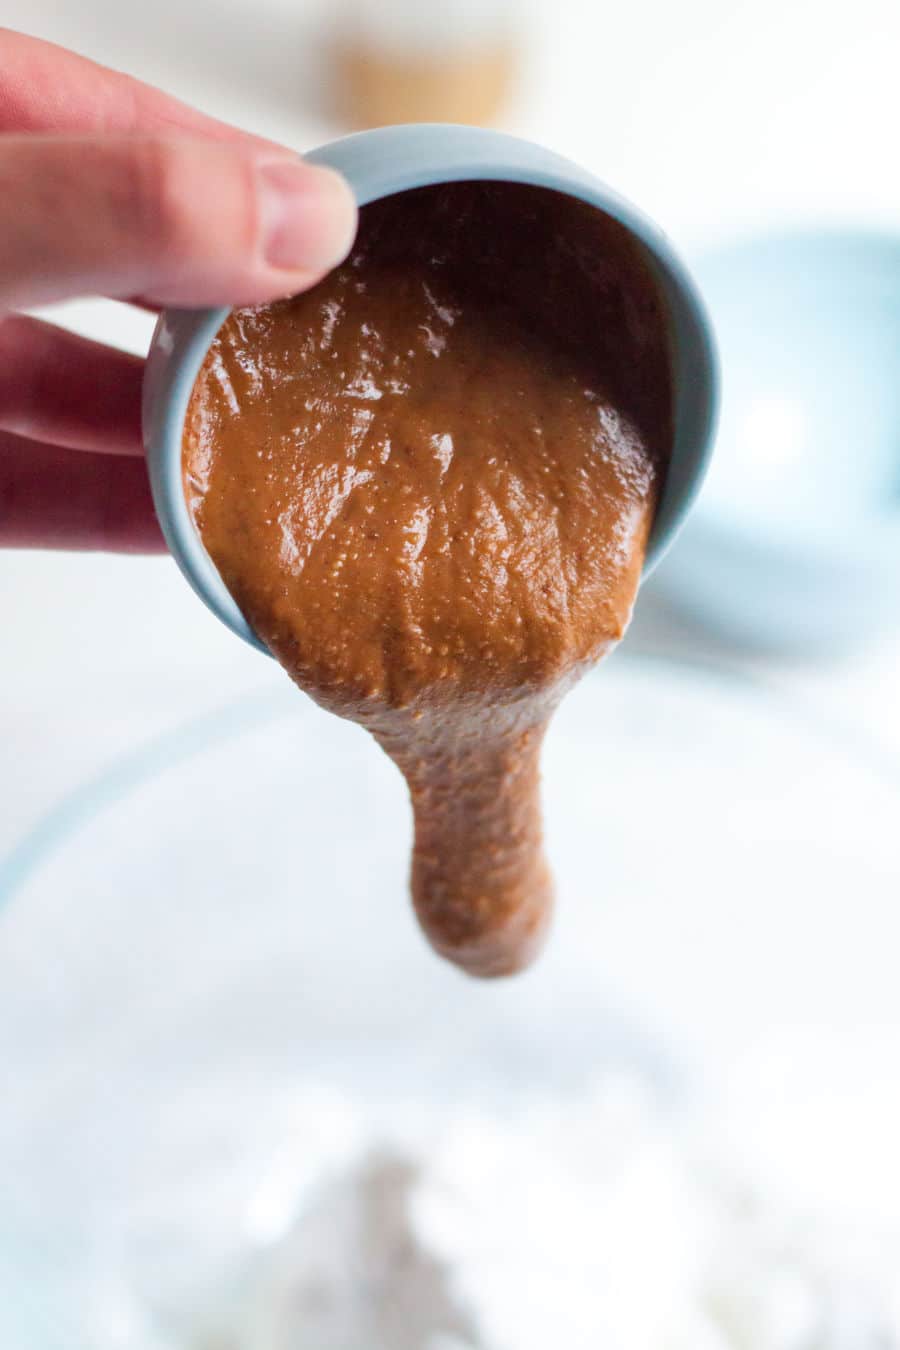 all natural peanut butter being poured into a bowl